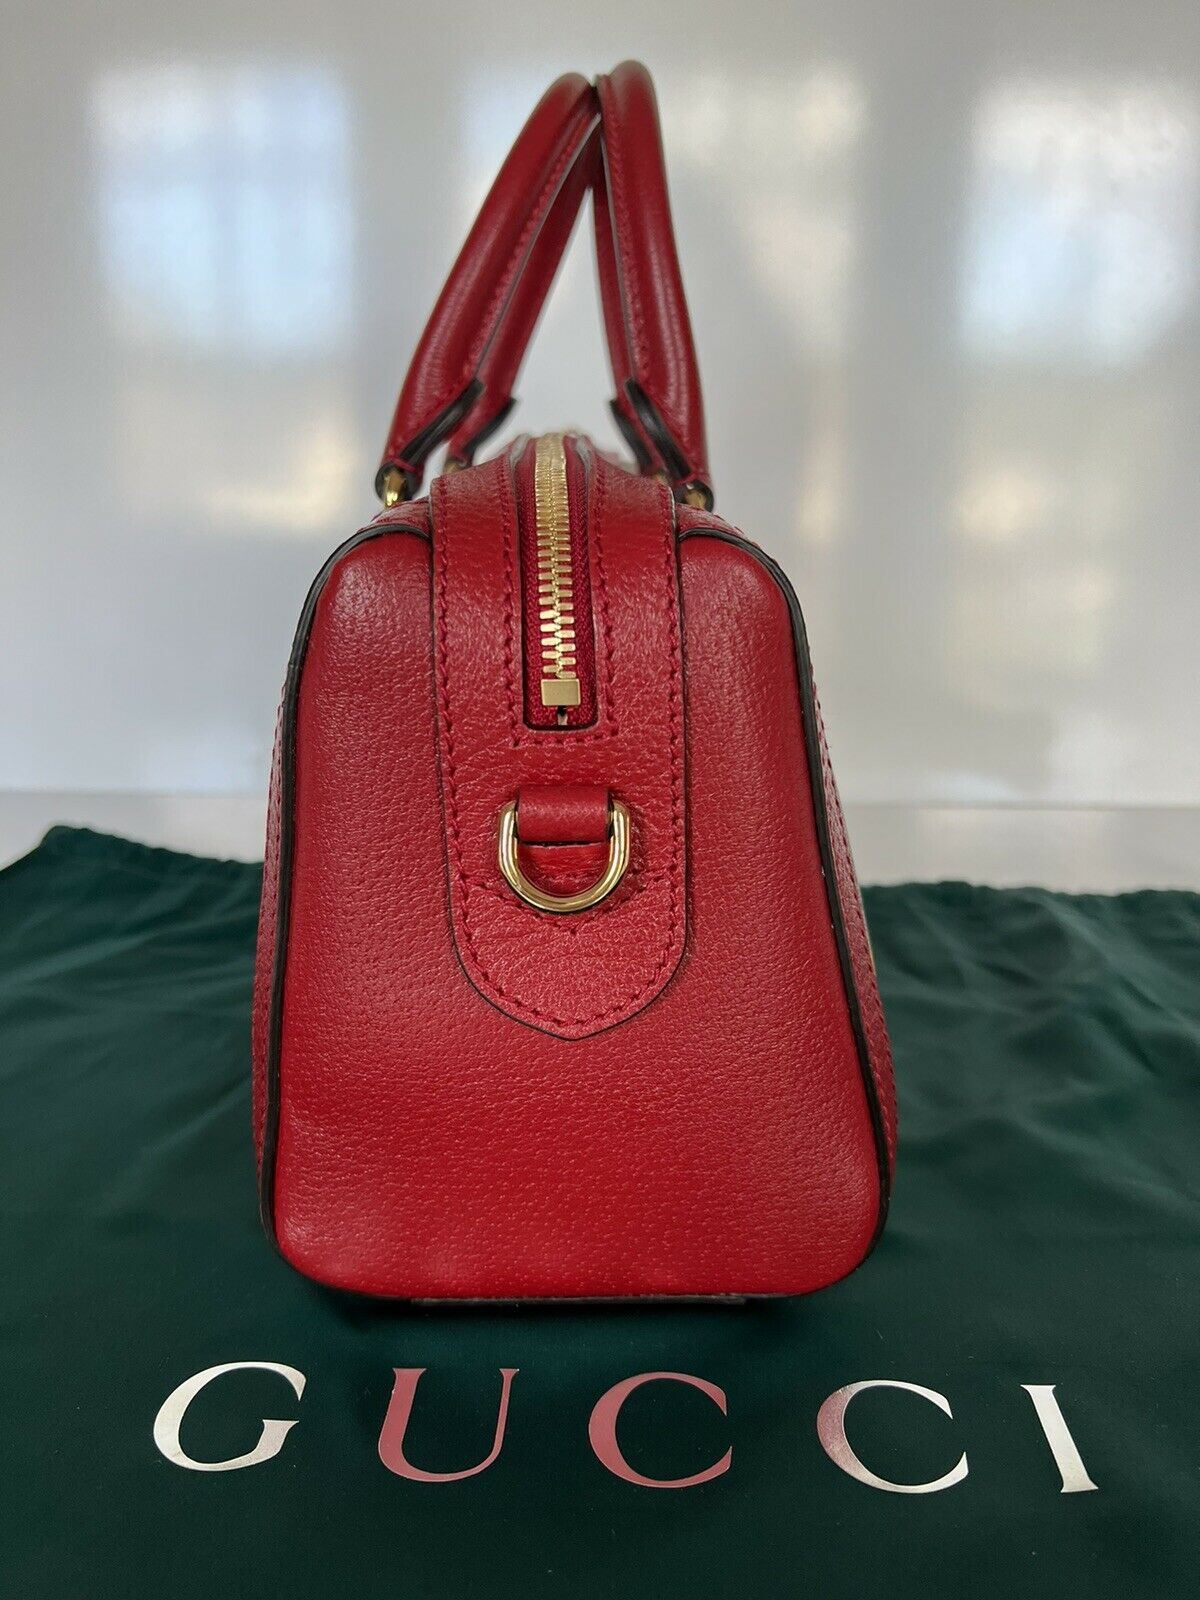 NWT Gucci Ophidia GG Flora Tote Bag Made in Italy 524532